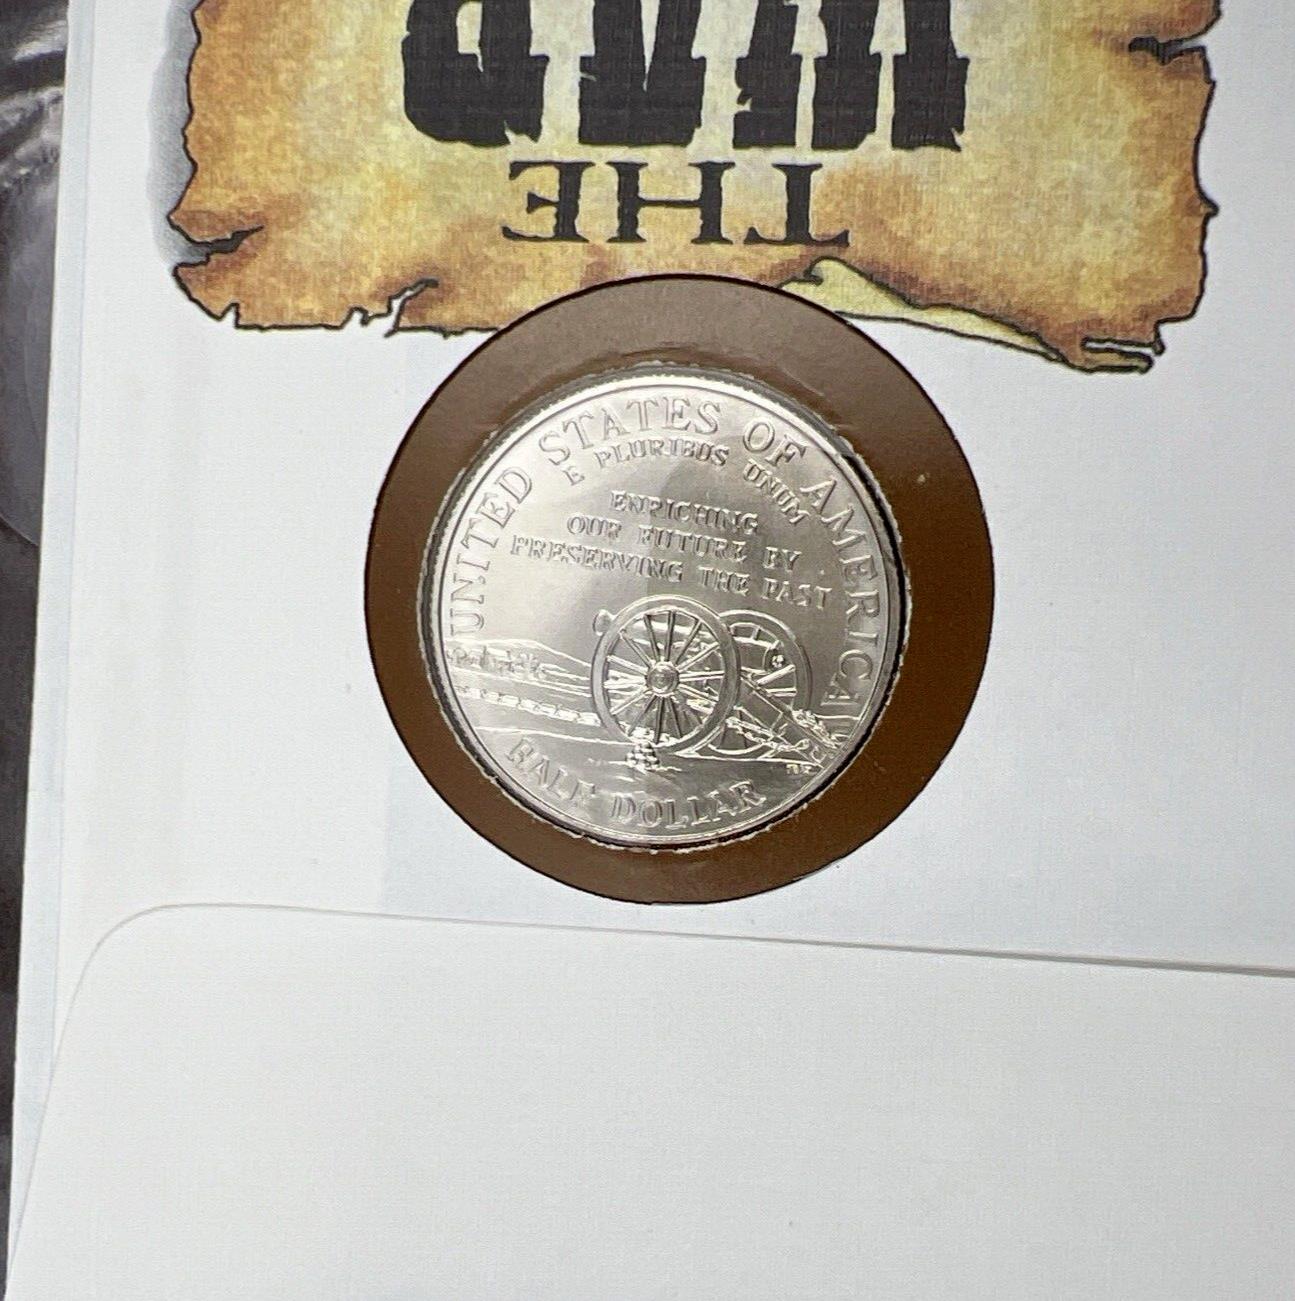 1995 Civil War Commemorative Half Dollar Coin with Stamps in Leather Display